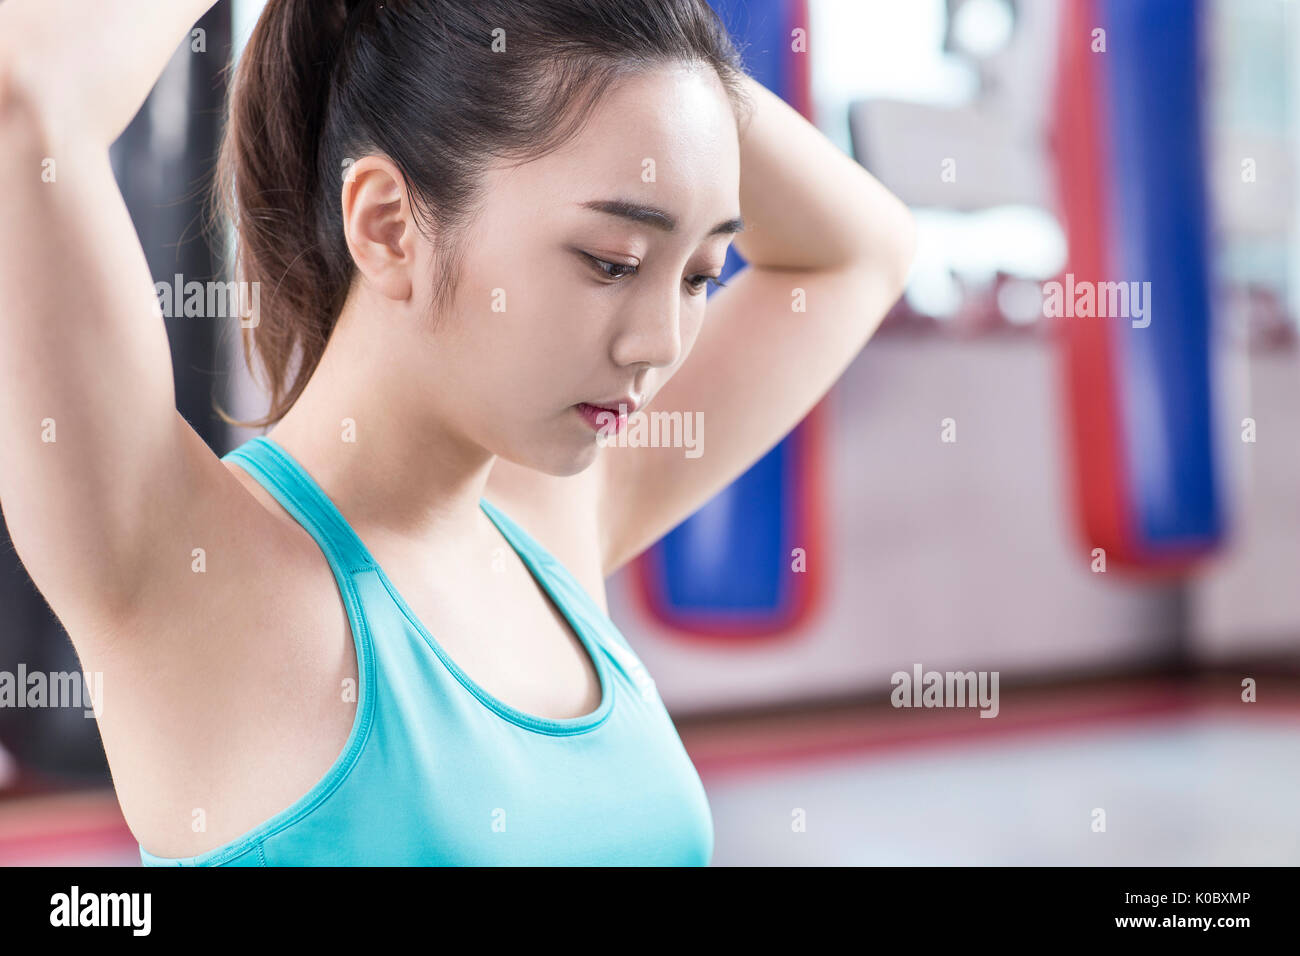 Side view portrait of young woman in sportswear Stock Photo